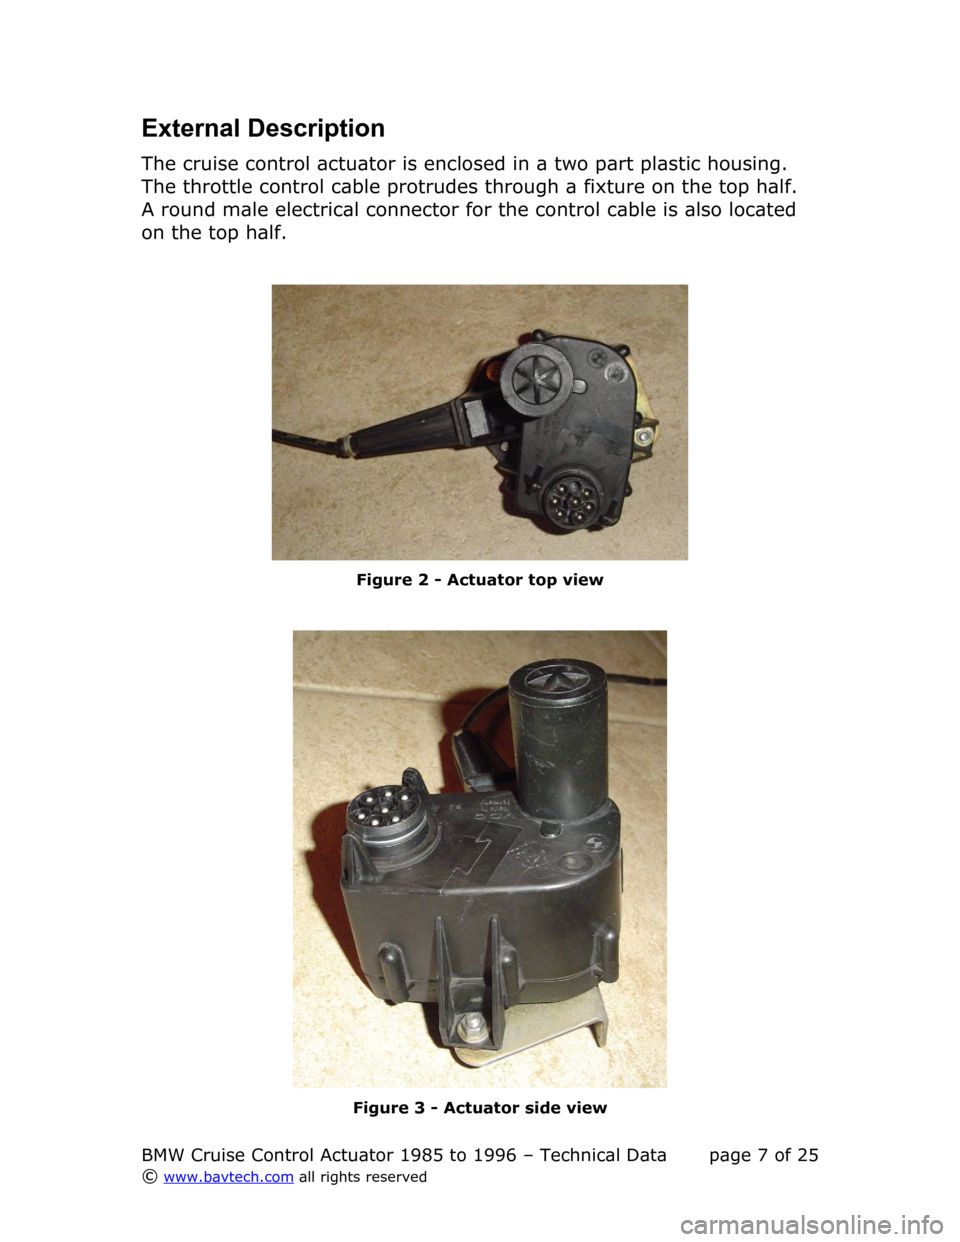 BMW 5 SERIES 1995 E34 Cruise Control Acutator External Description
The cruise control actuator is enclosed in a two part plastic housing.  
The throttle control cable protrudes through a fixture on the top half.  
A round male electrical connecto